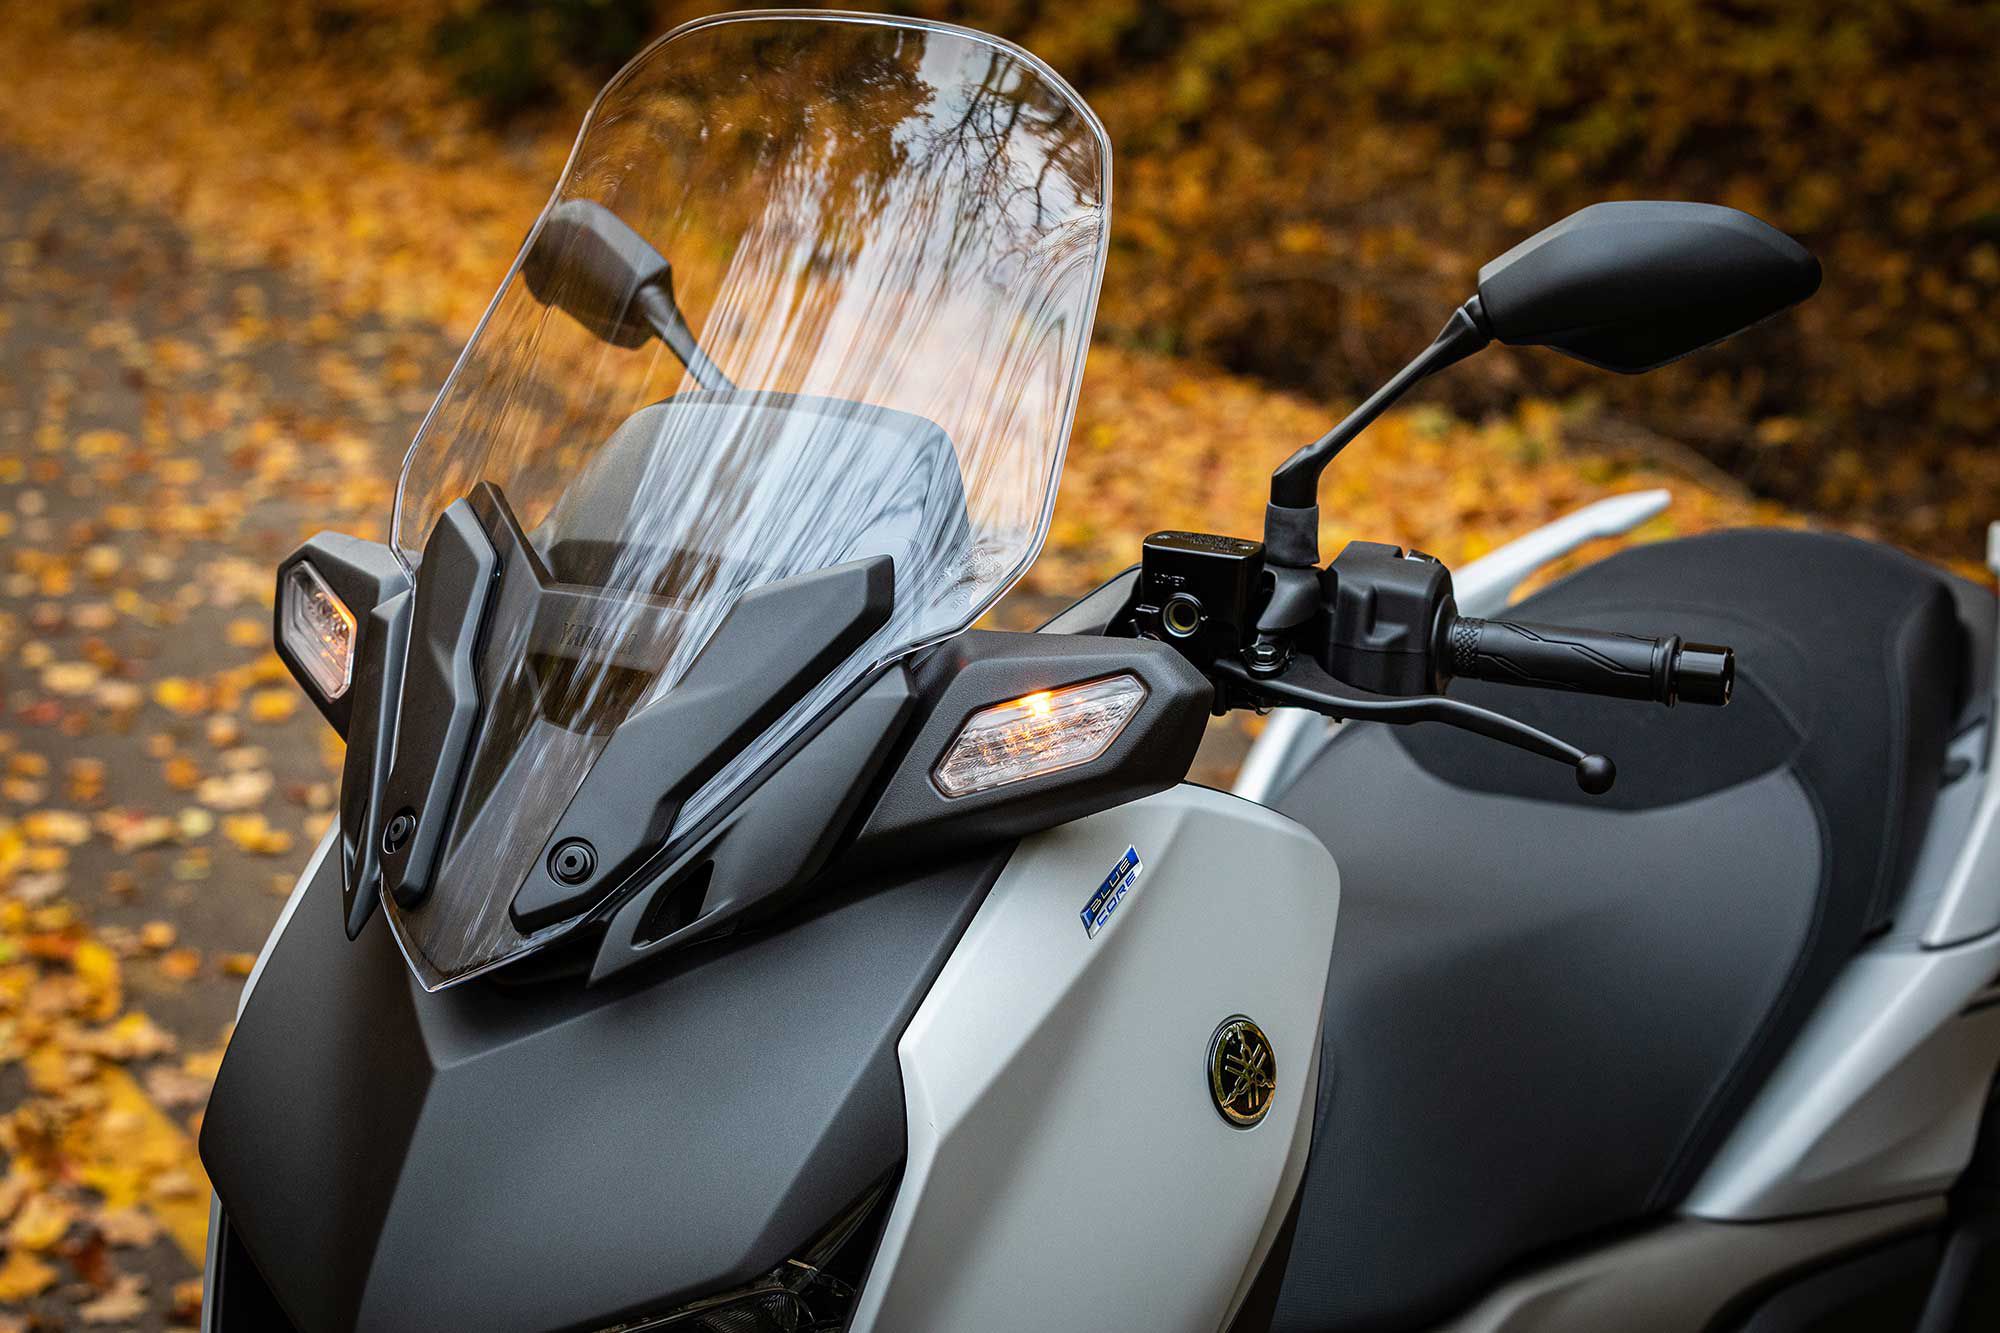 The windscreen and handlebars are adjustable.